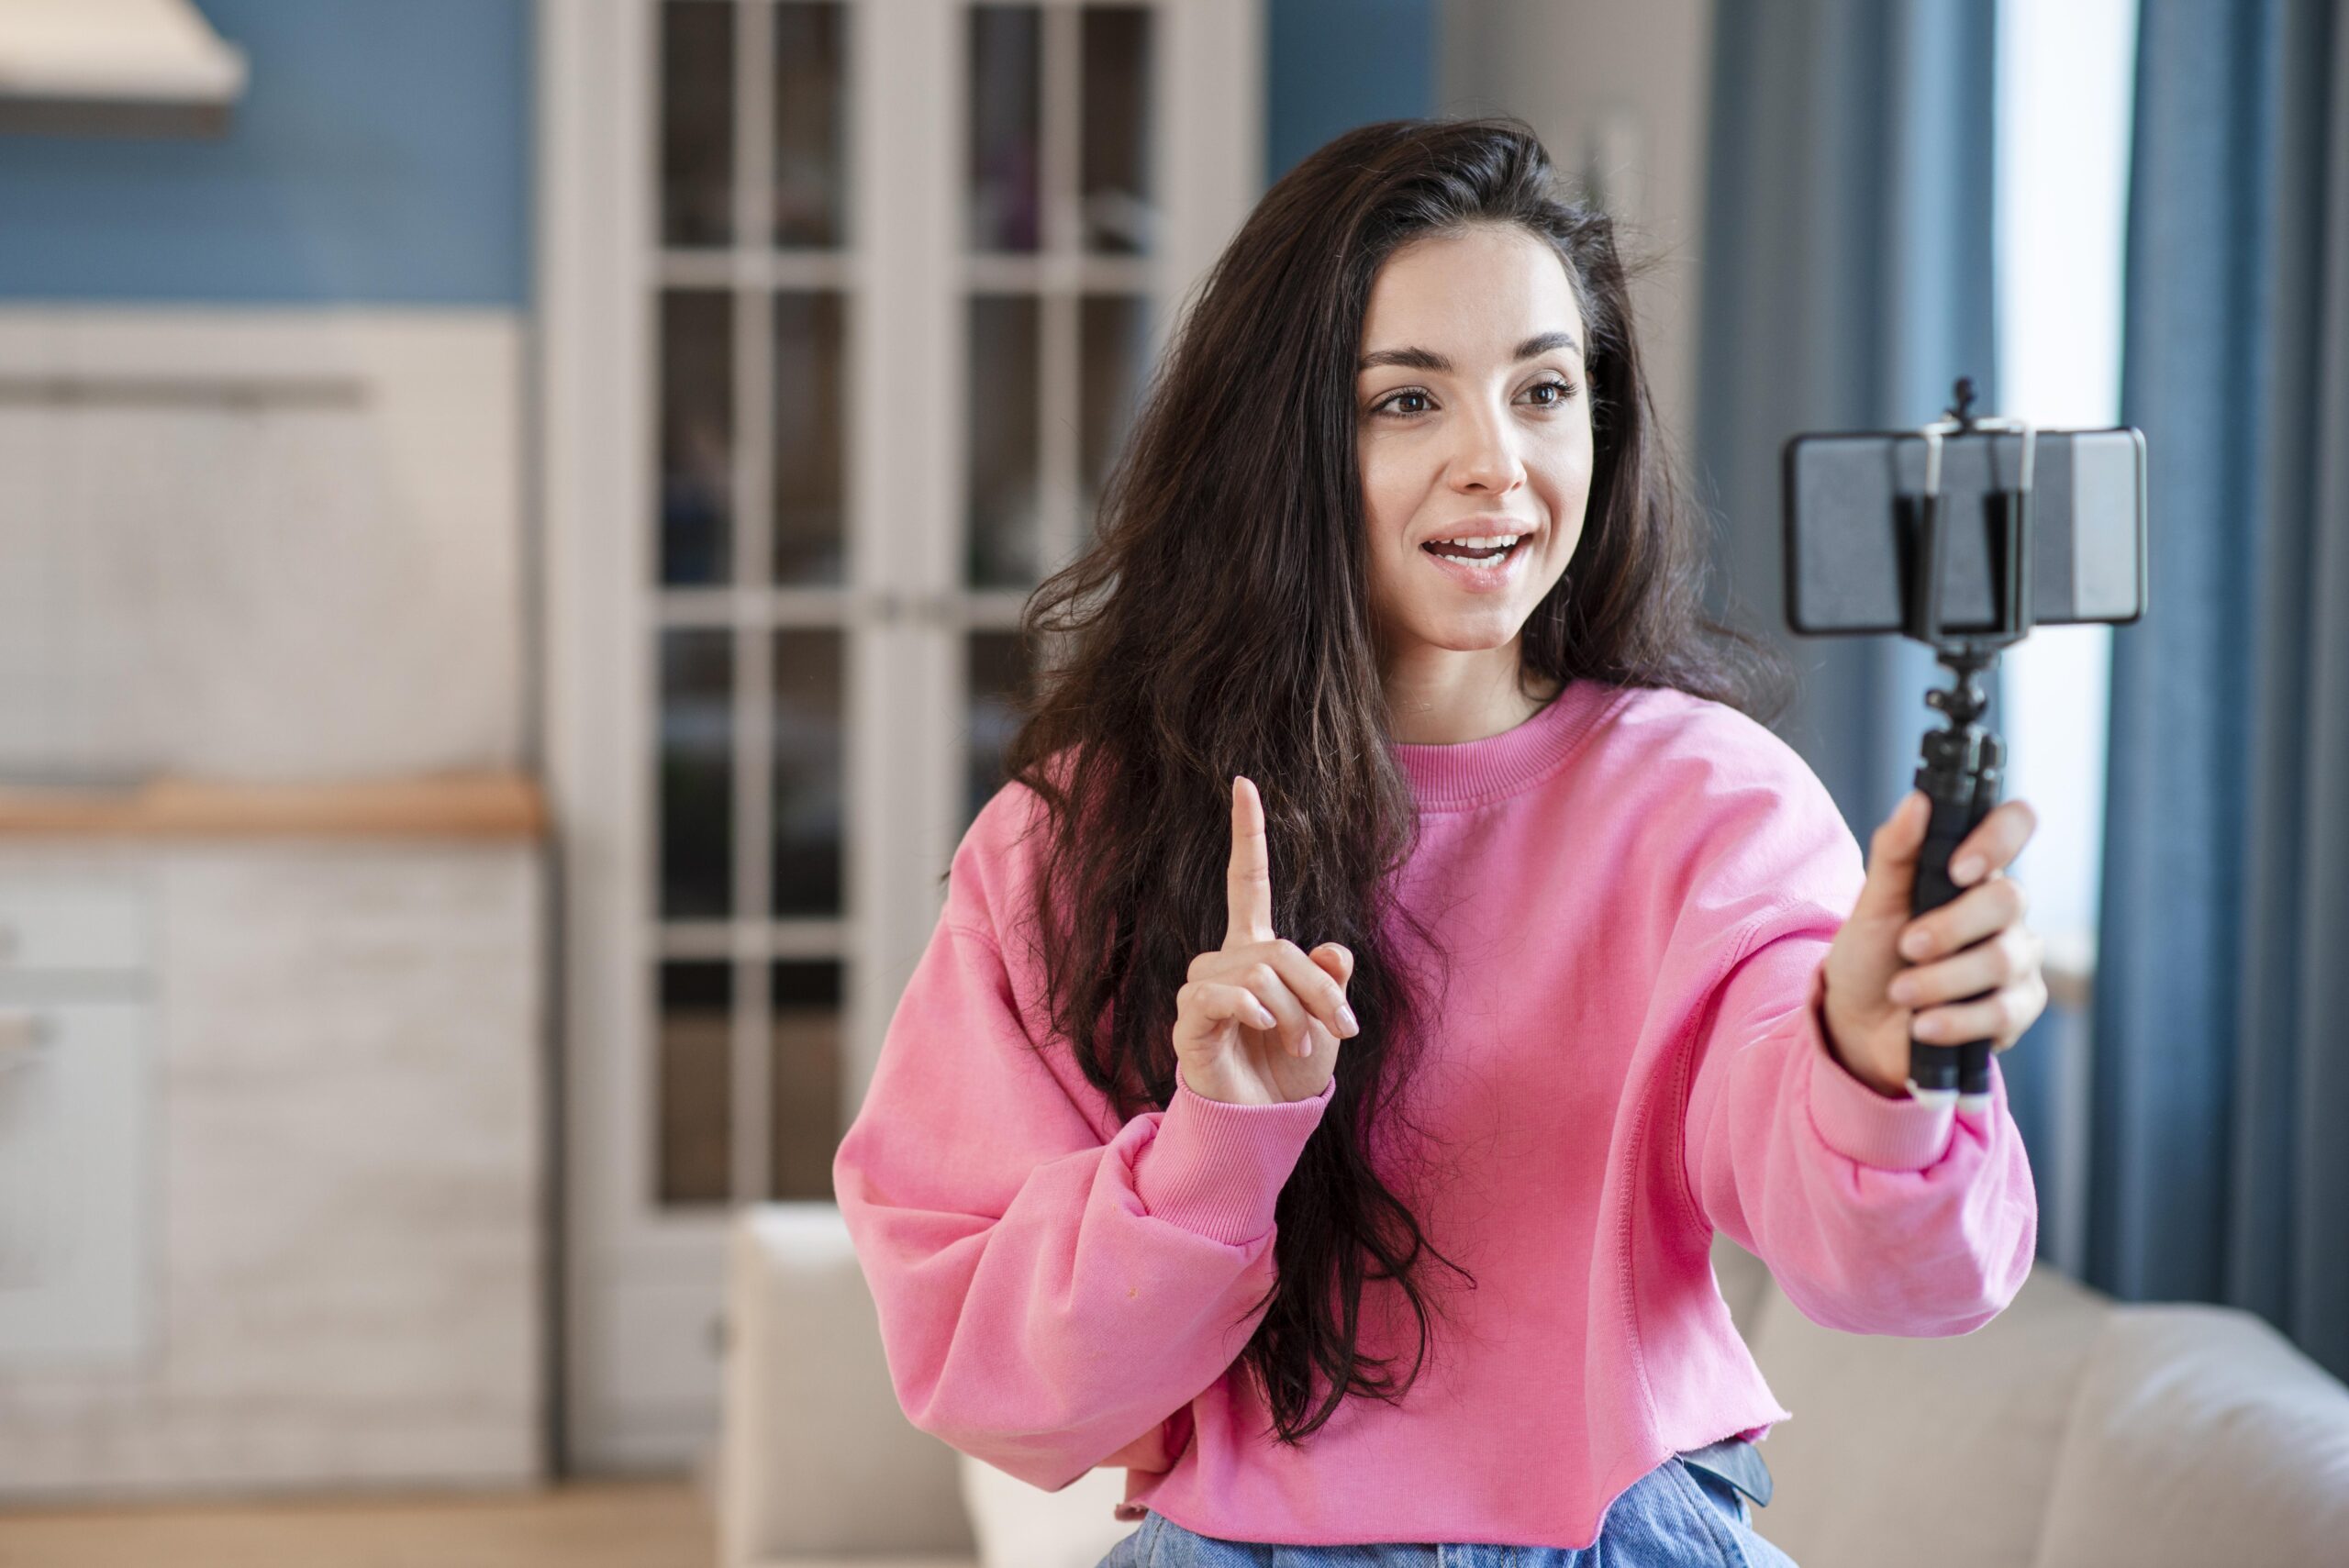 Youtube and Instagram Video Production Training